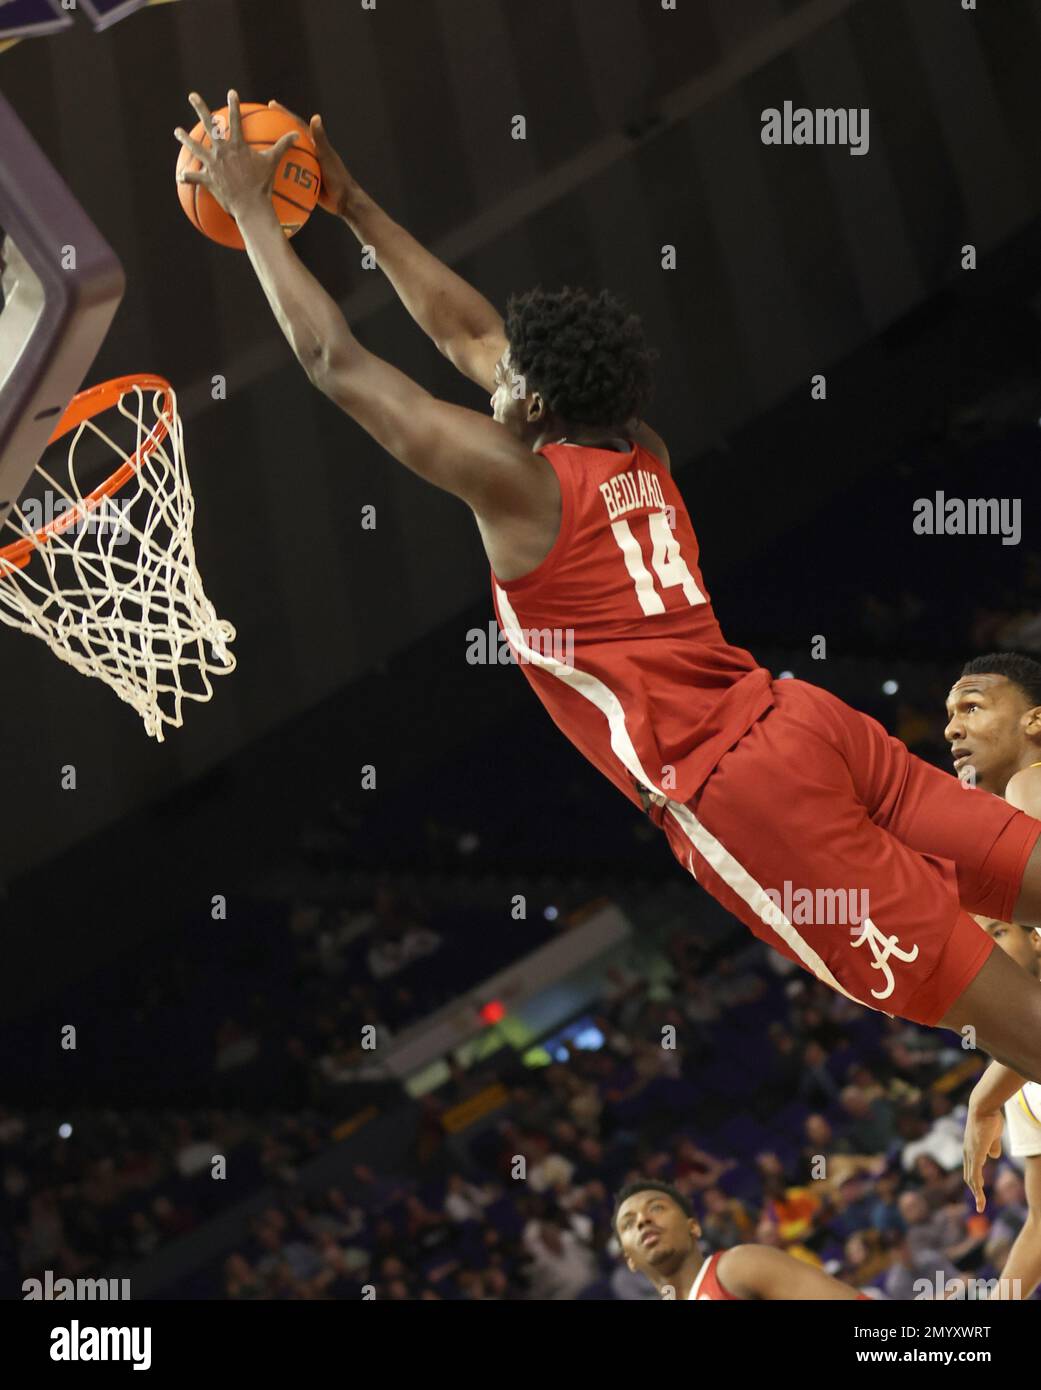 Baton Rouge, USA. 04th Feb, 2023. Alabama Crimson Tide center Charles Bediako (14) throws a breakaway dunk during a men's college basketball game at the Pete Maravich Assembly Center in Baton Rouge, Louisiana on Saturday, February 4, 2023. (Photo by Peter G. Forest/Sipa USA) Credit: Sipa USA/Alamy Live News Stock Photo